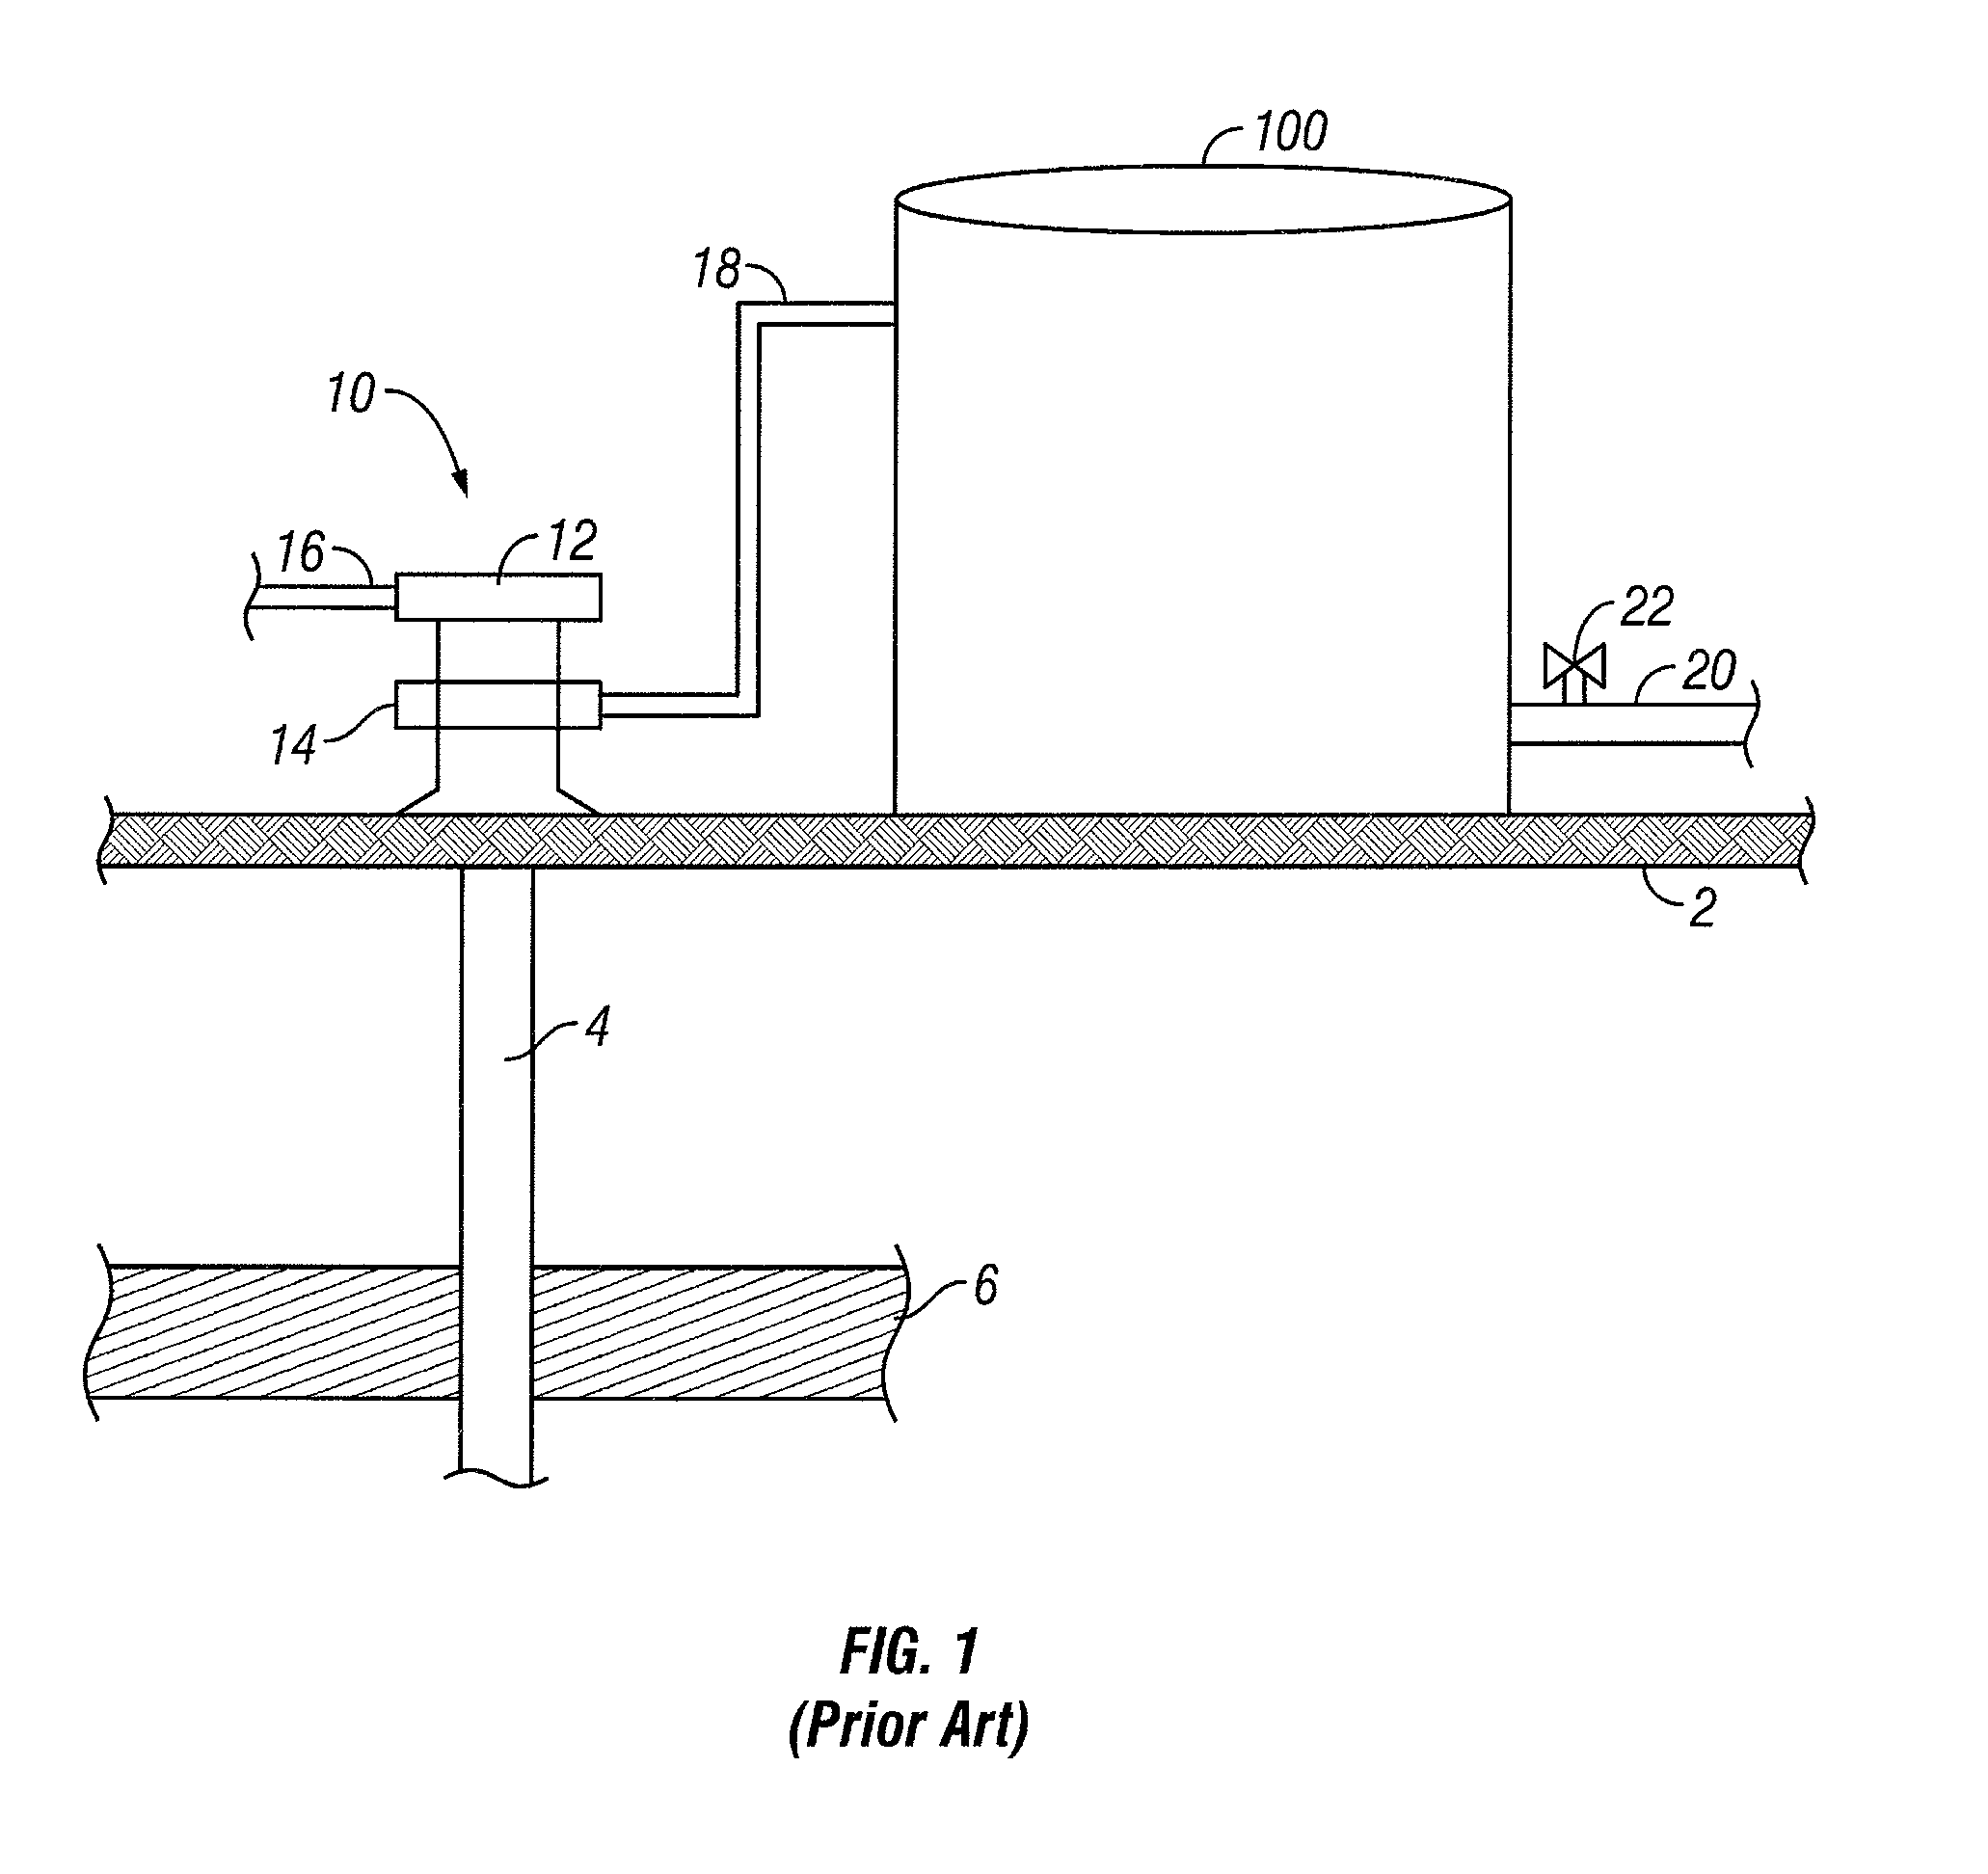 Method of constructing a secondary containment area